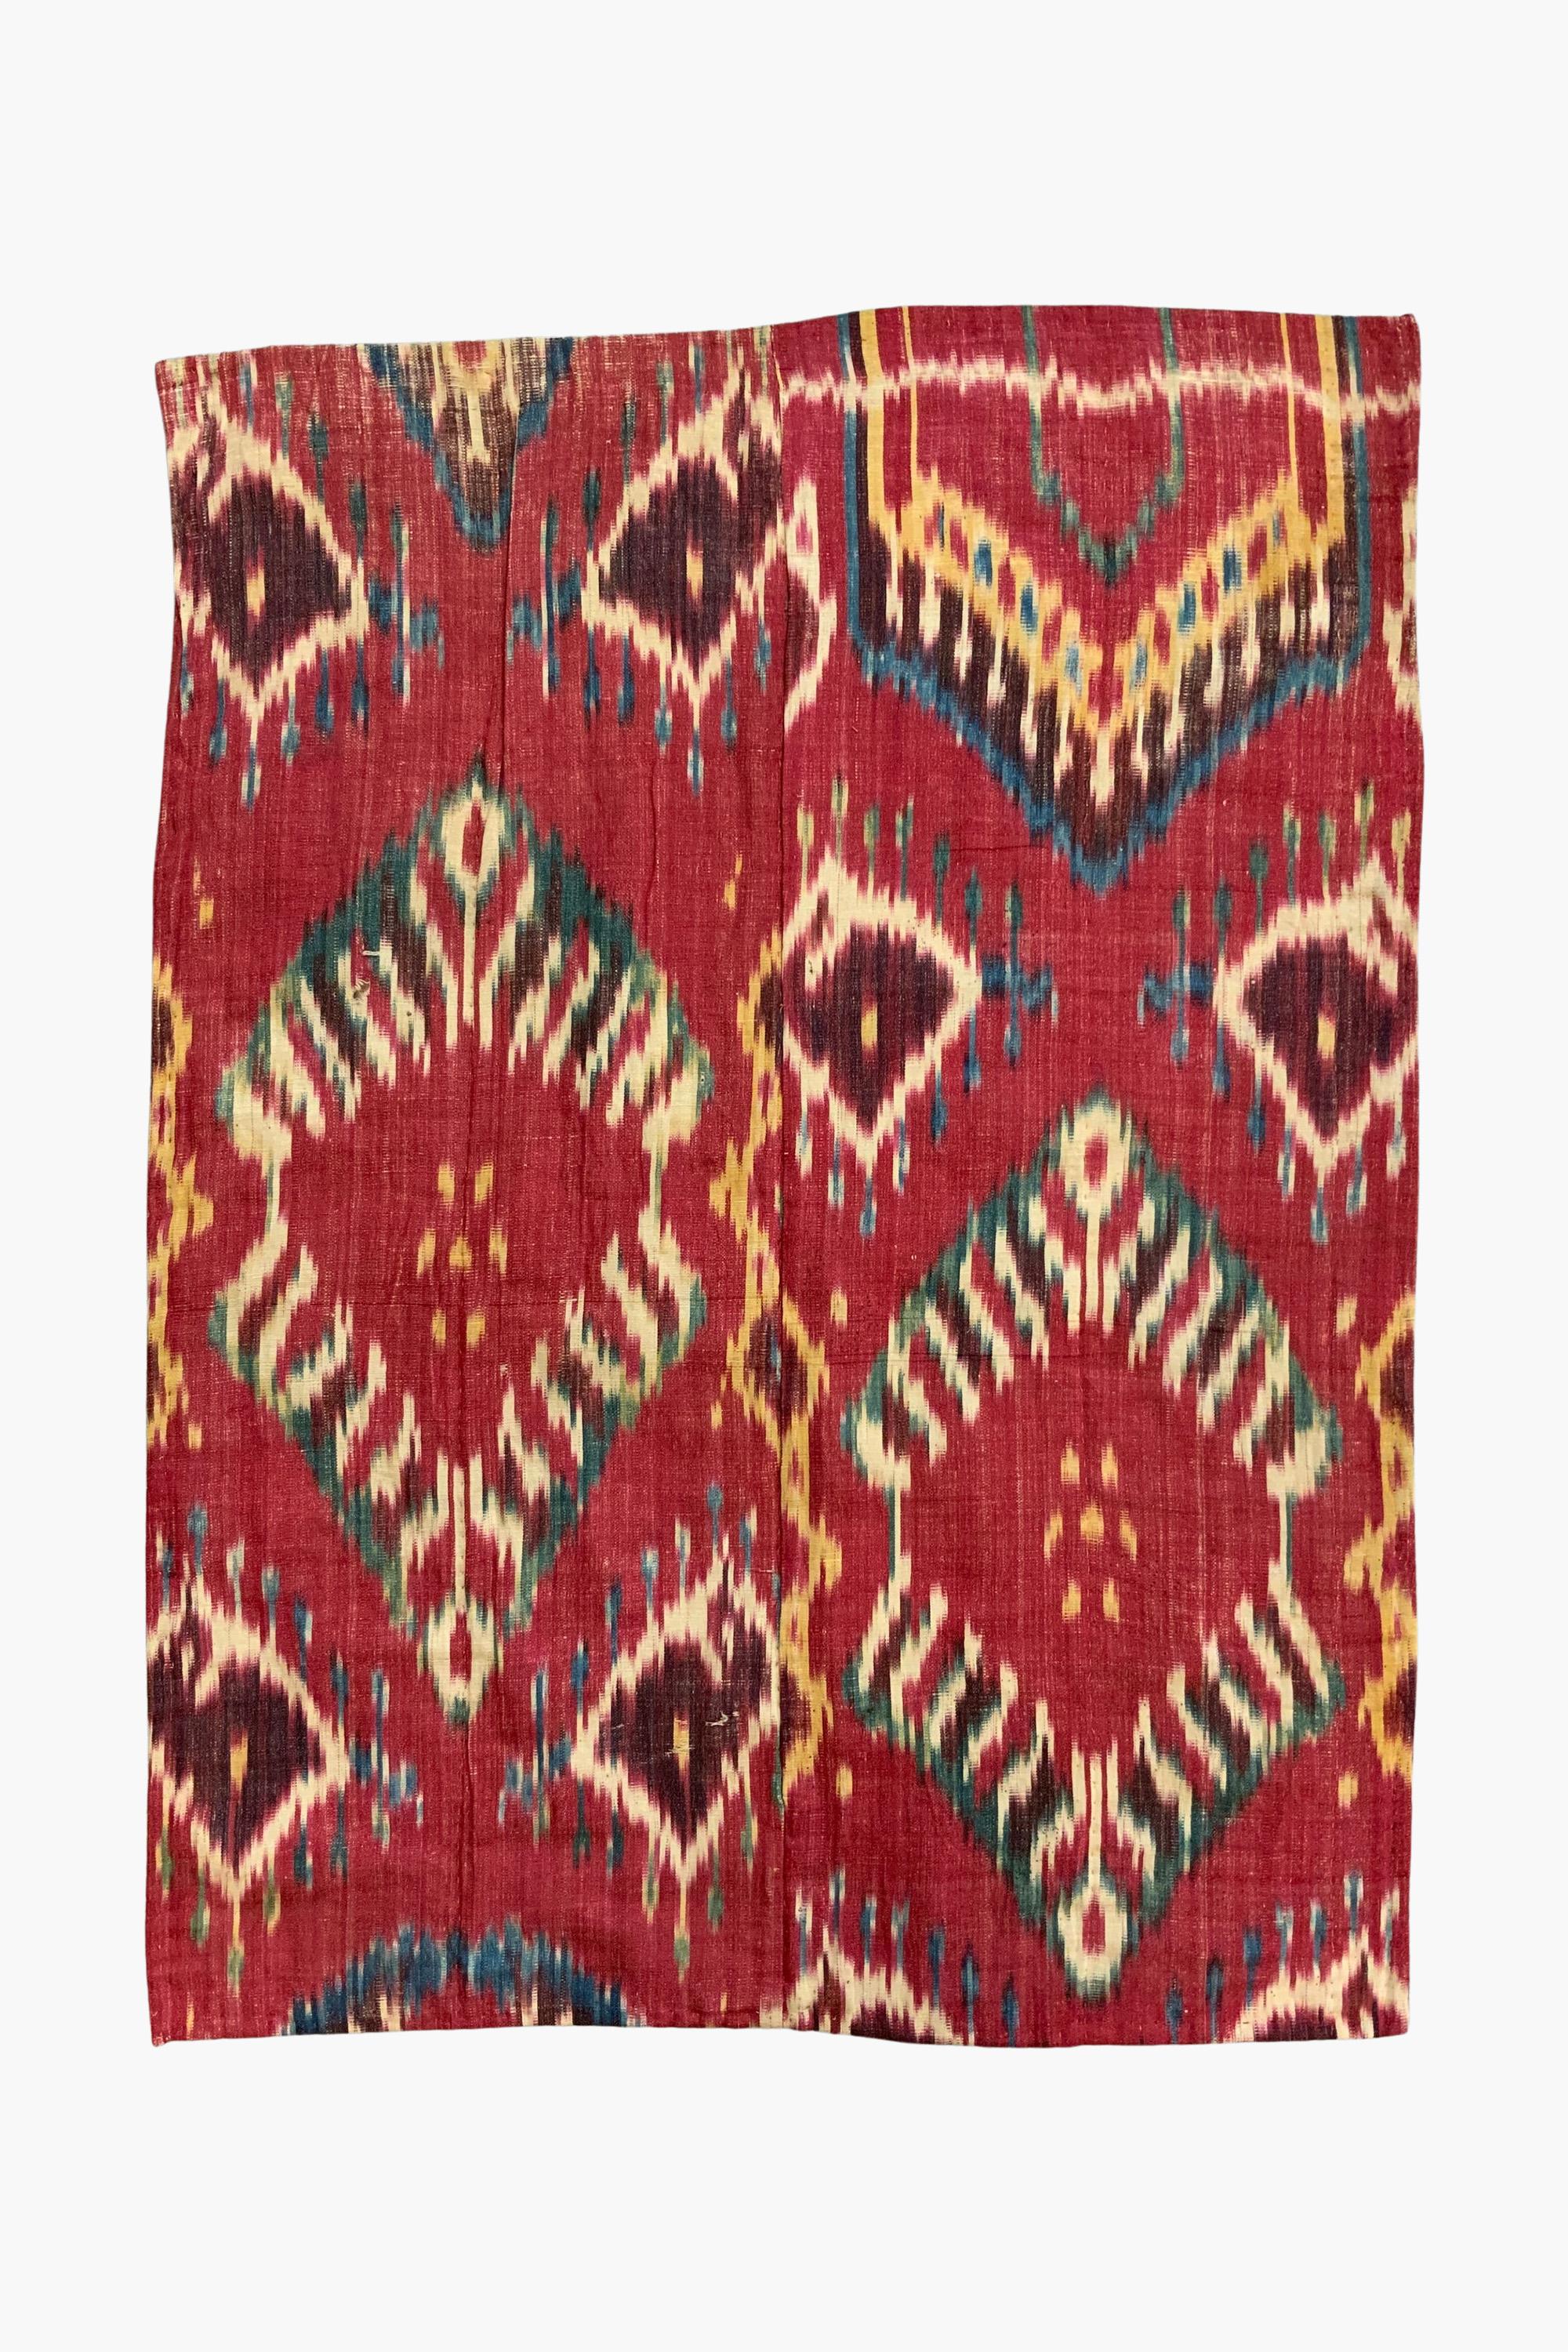 A fragment of the very best Bukhara quality ikat - fully saturated colour with 6 or 7 colours. Probably from a wall hanging.

For references see:
c.f. Goldman collection plates 17, 38, 39
c.f. Colours of the Oassi (Megali collection) plate 92